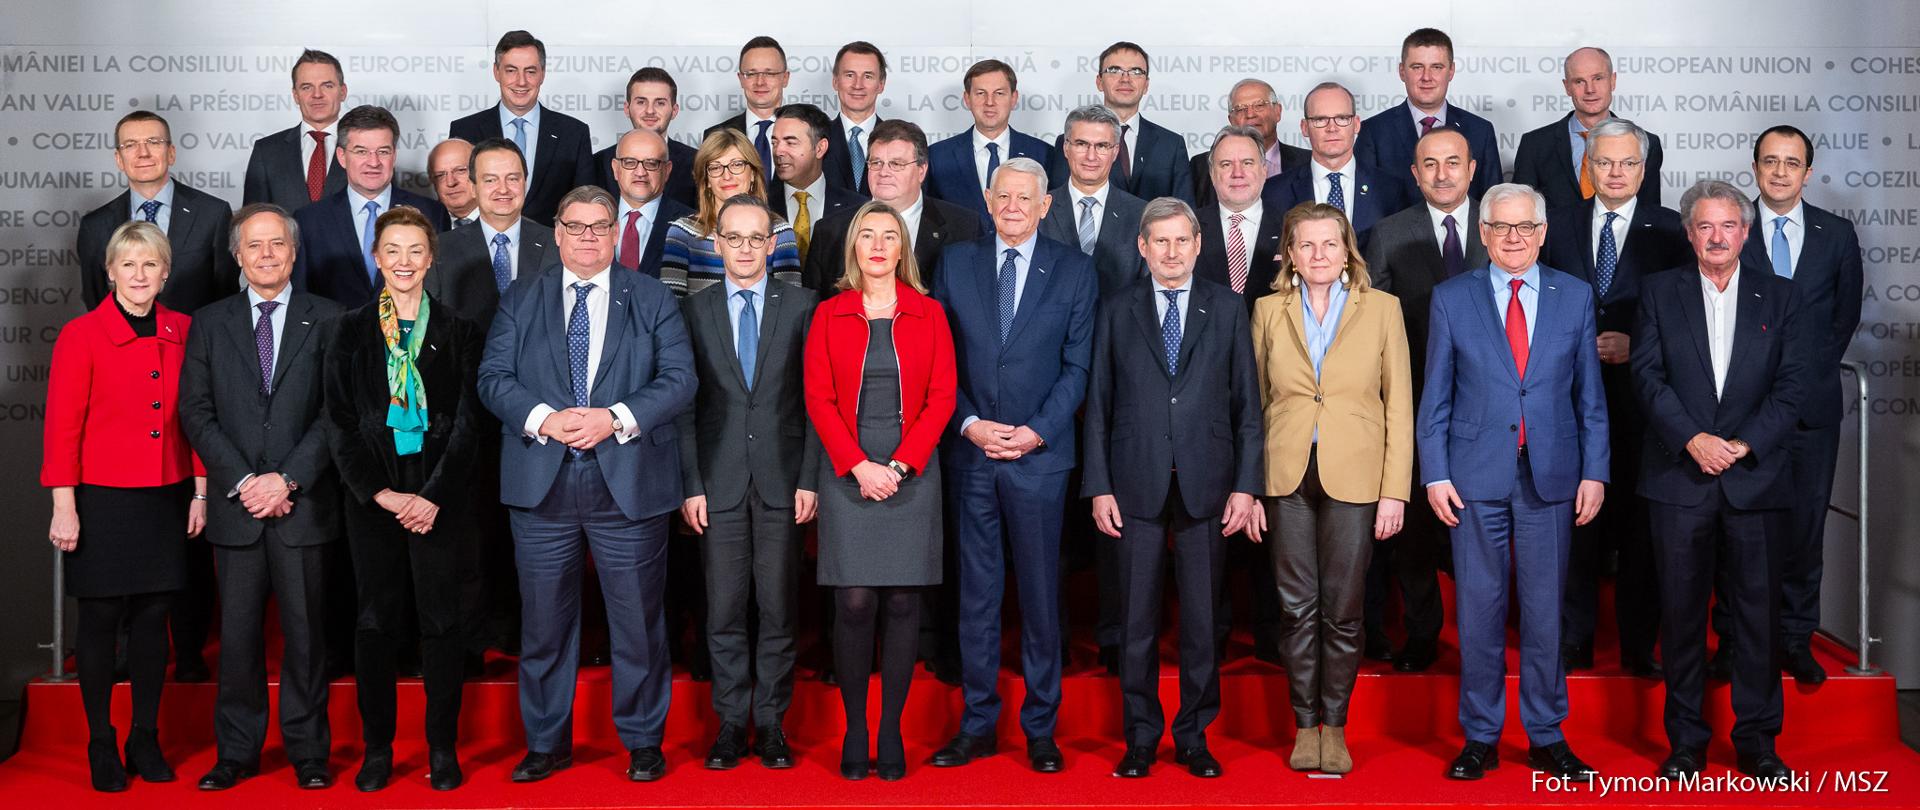 Second day of Gymnich meeting of EU foreign ministers